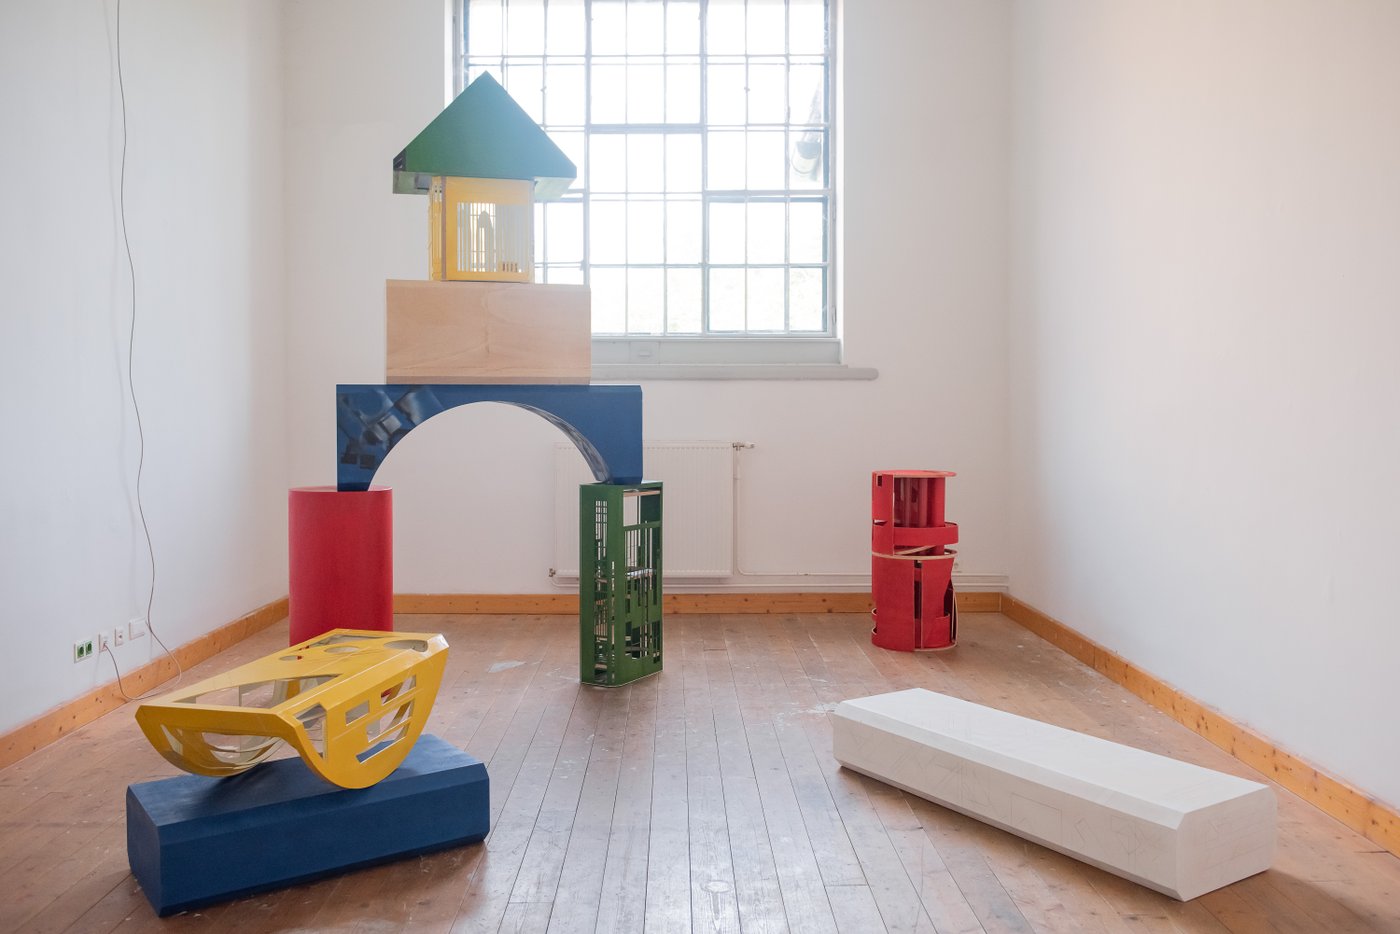 view on a artwork that looks like a childrens playhouse out of colorful bricks